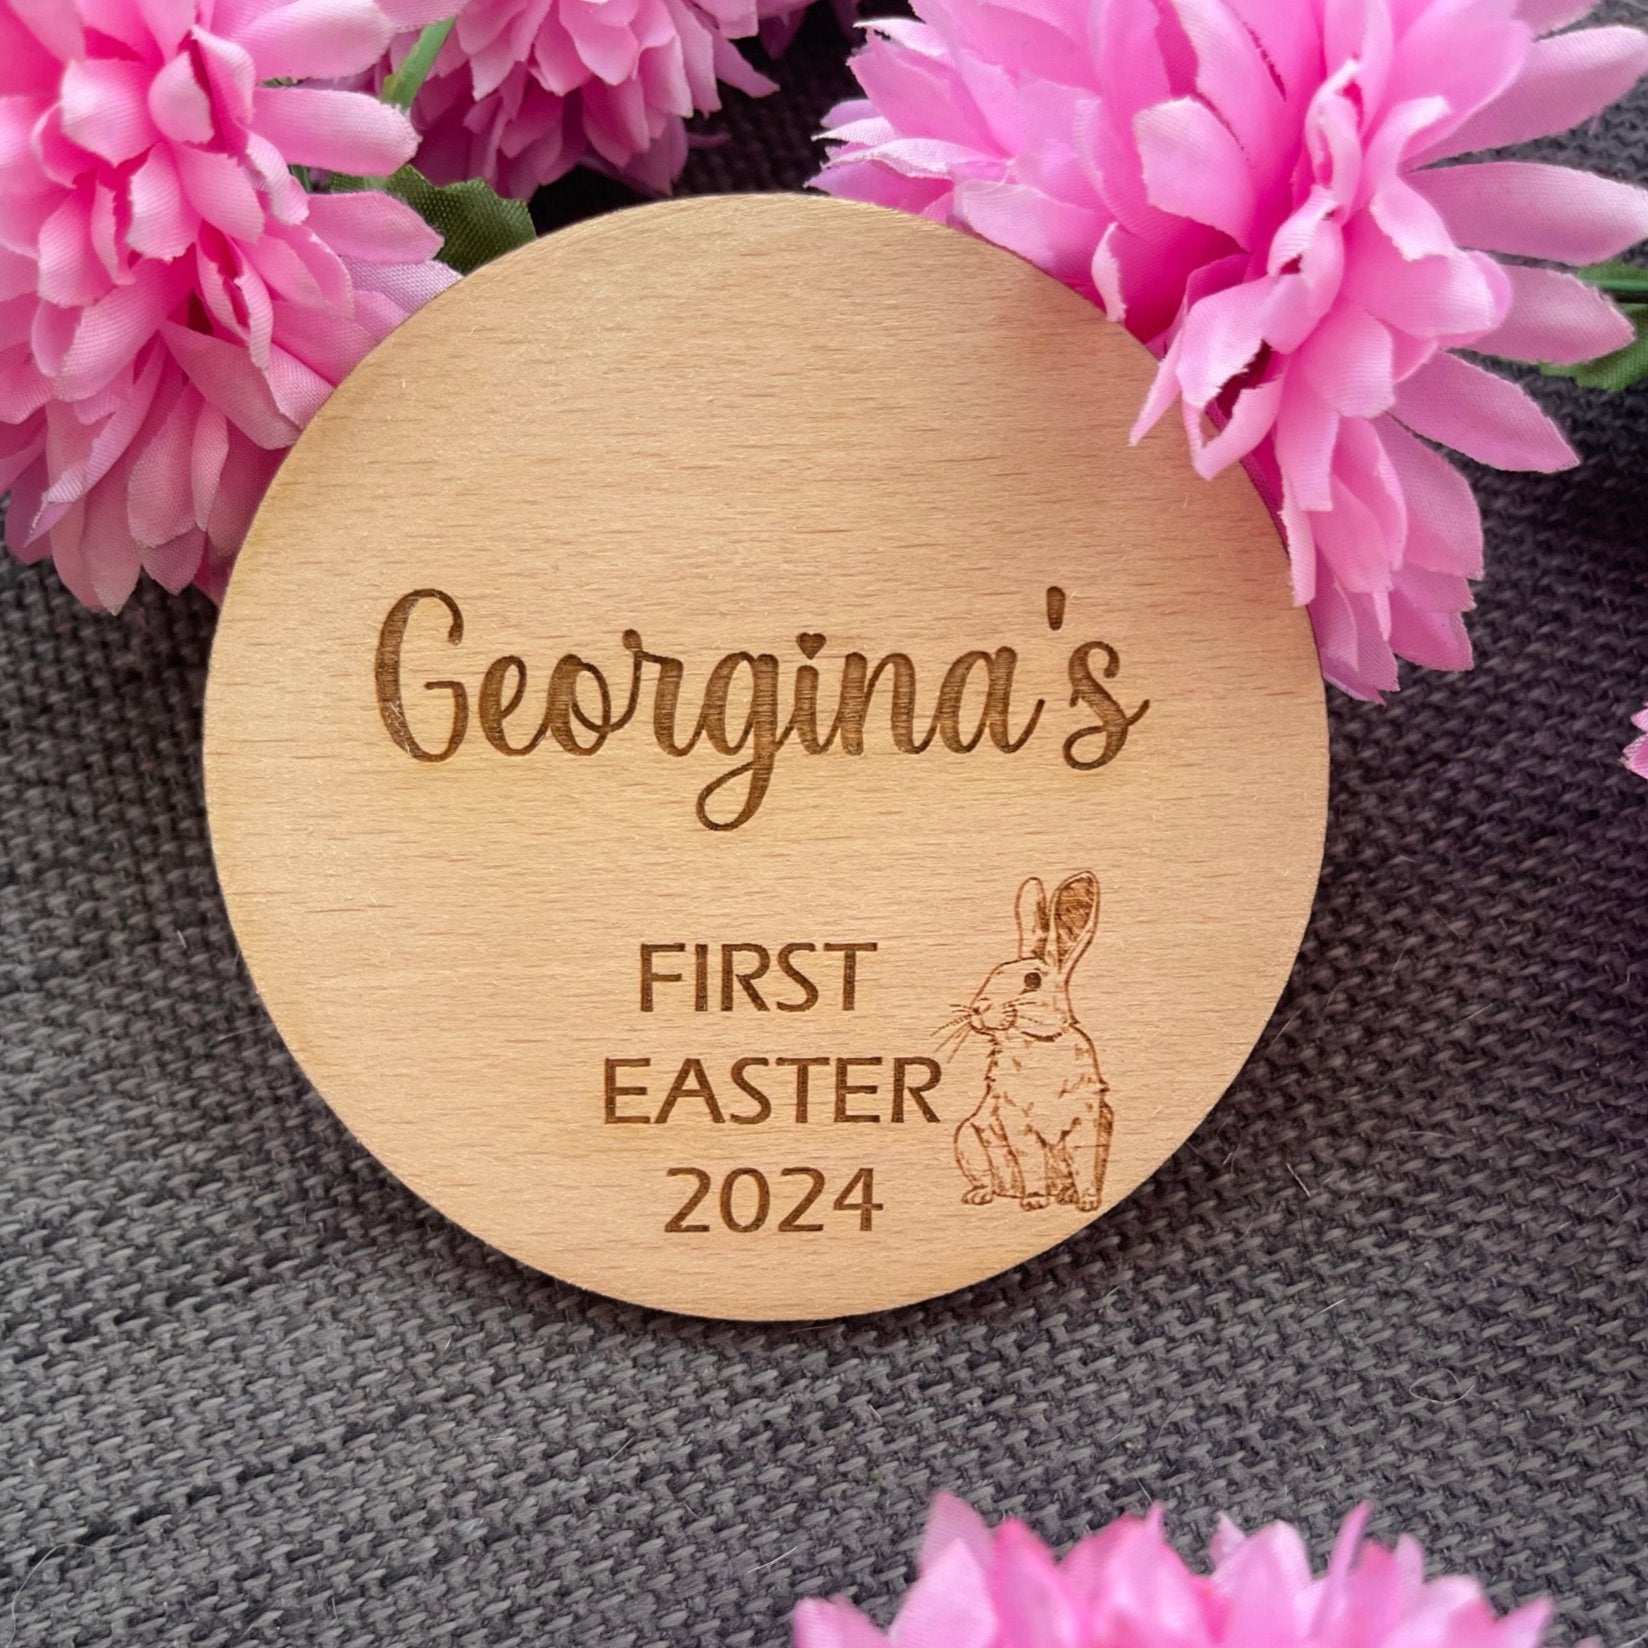 Personalised Engraved Baby's First Easter Name Plaque – A Charming Keepsake" .charming addition to photos. Choose from 10cmX10cm or 15cmX15CM.